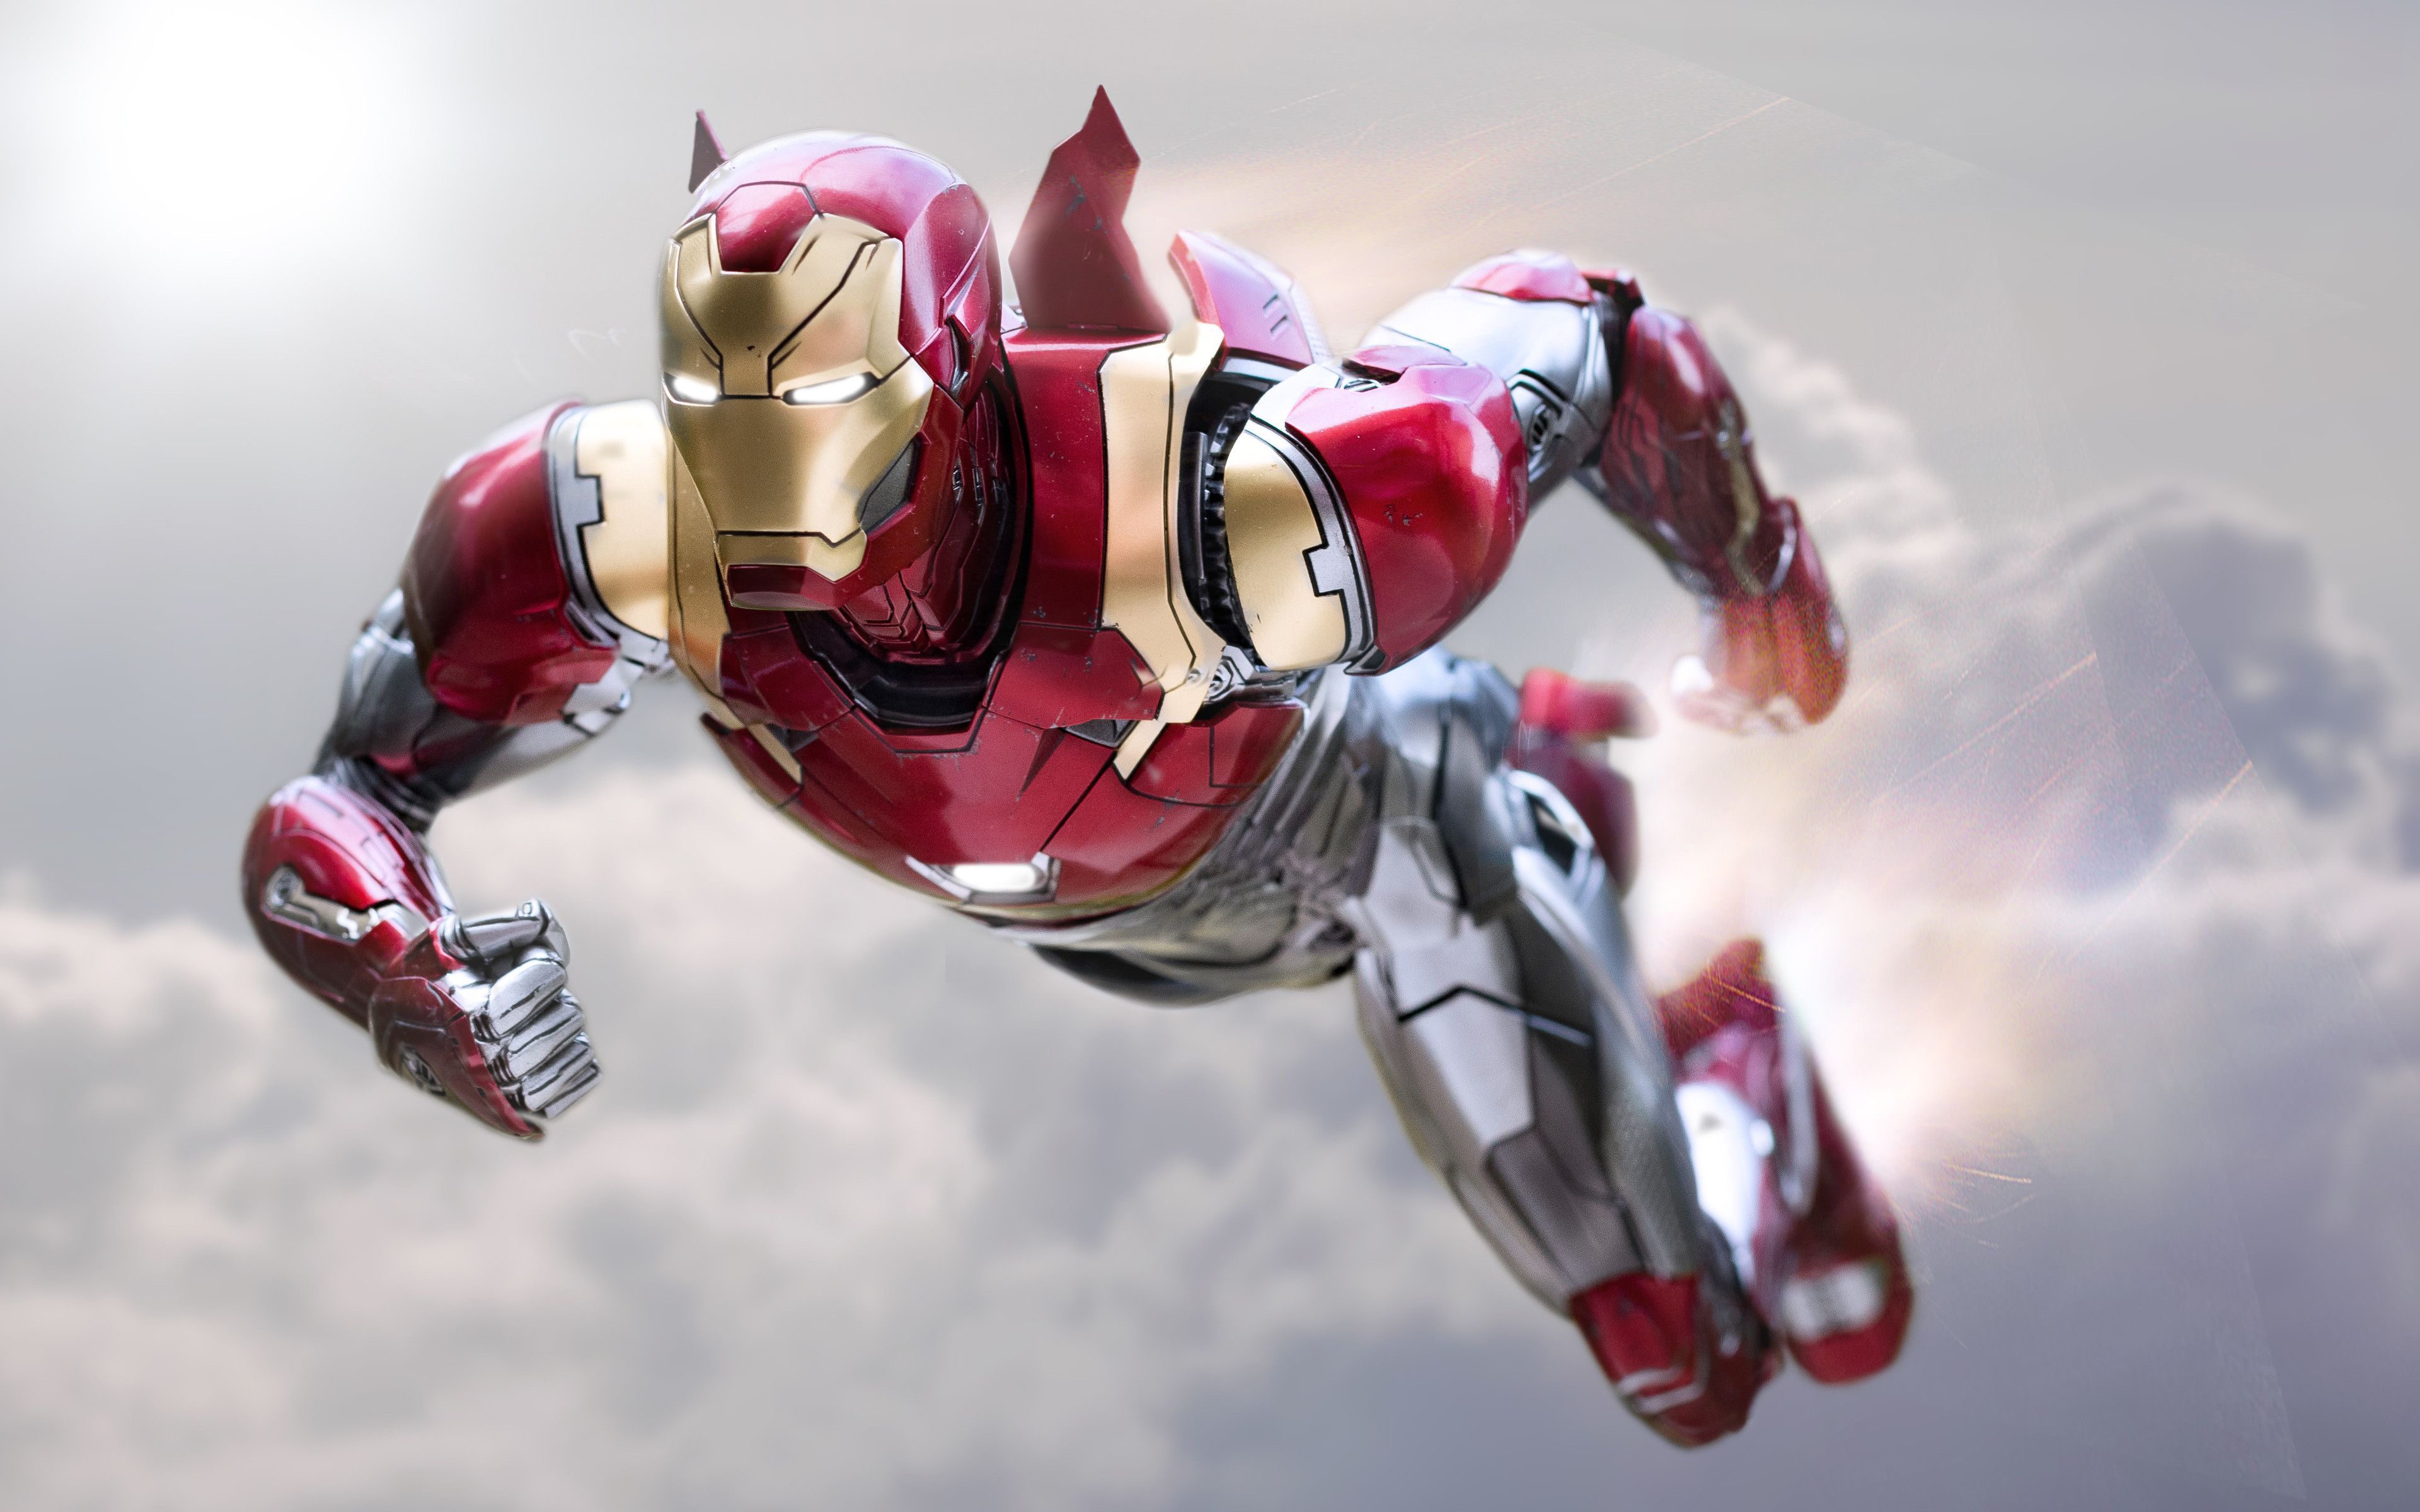 Download wallpaper Flying IronMan, 4k, sky, IronMan in New Suit superheroes, DC Comics, Iron Man, IronMan for desktop with resolution 3840x2400. High Quality HD picture wallpaper